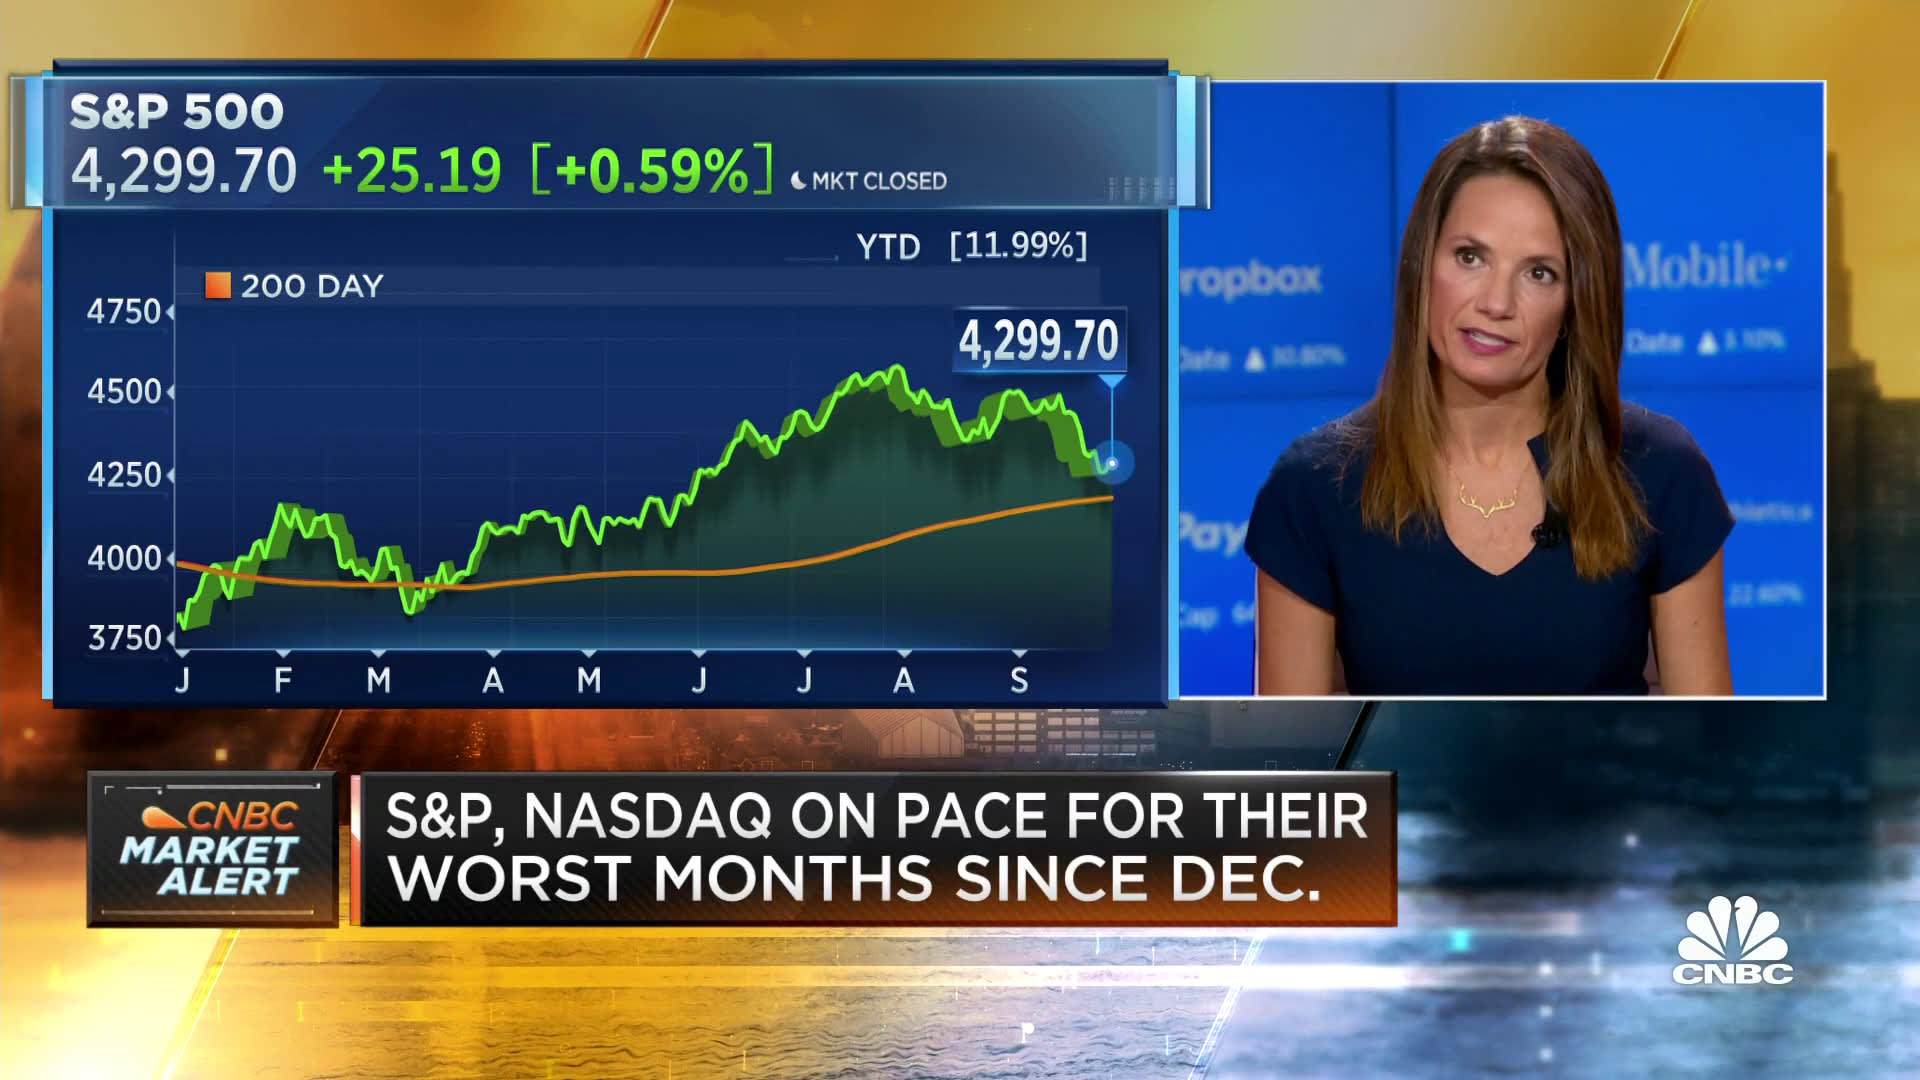 We expect the market correction to mature as early as next week, says Katie Stockton